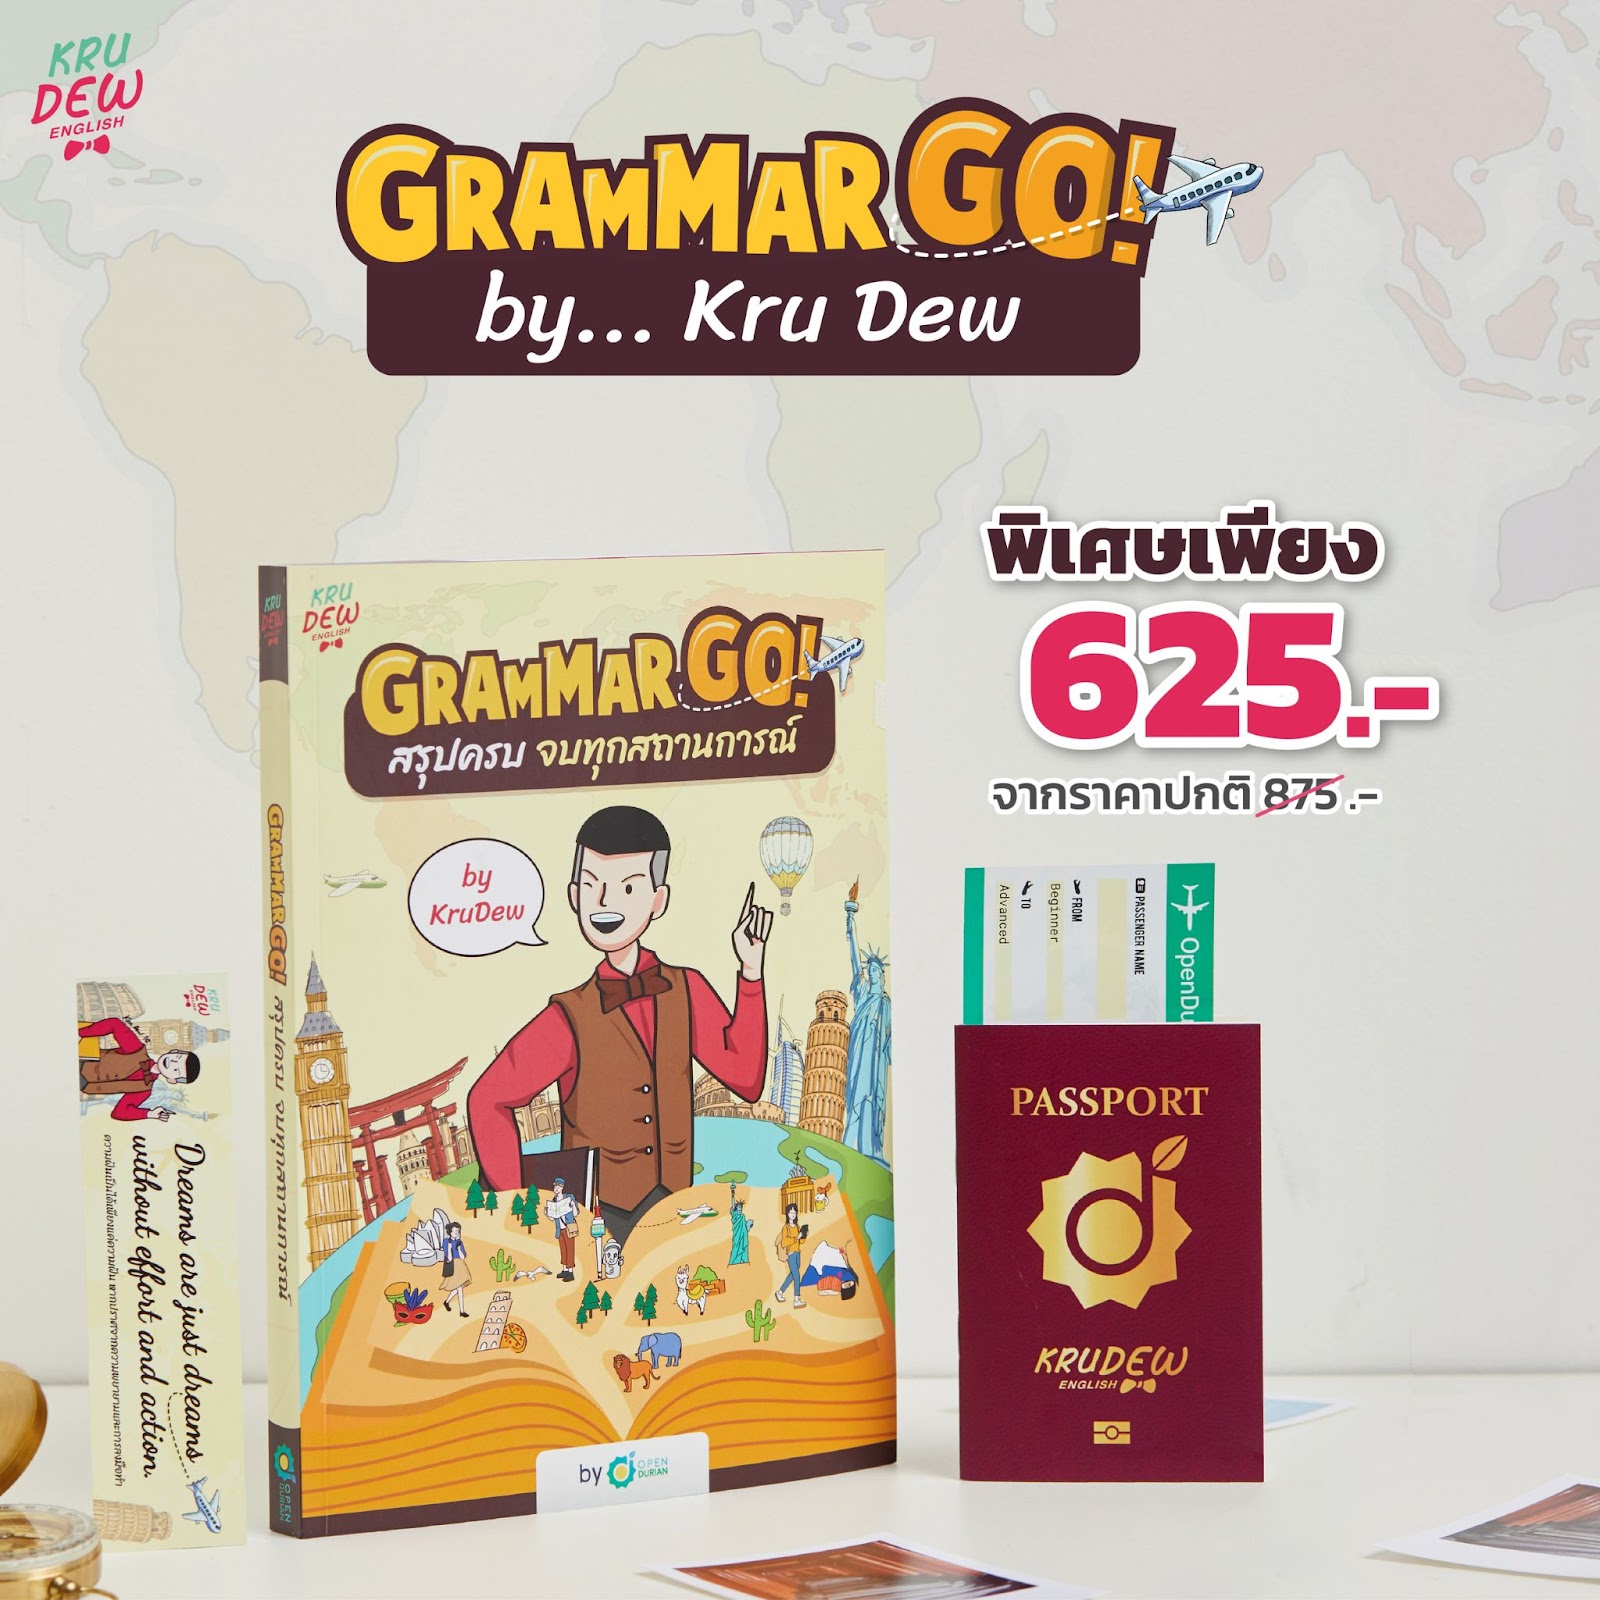 This grammar book has special price and free shipping